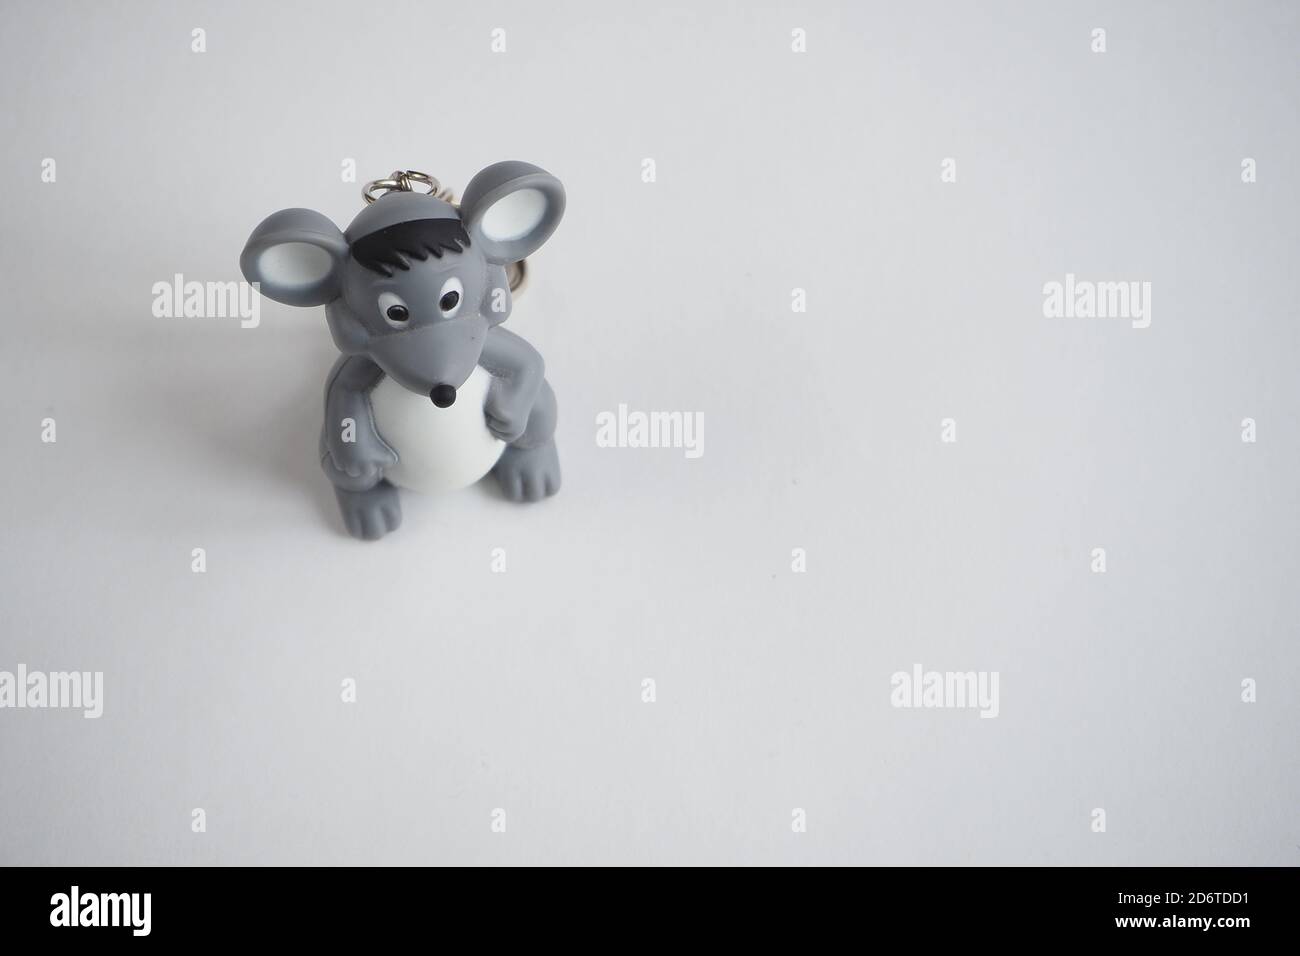 Children's toy mouse on a white background. Symbol of the year. Stock Photo